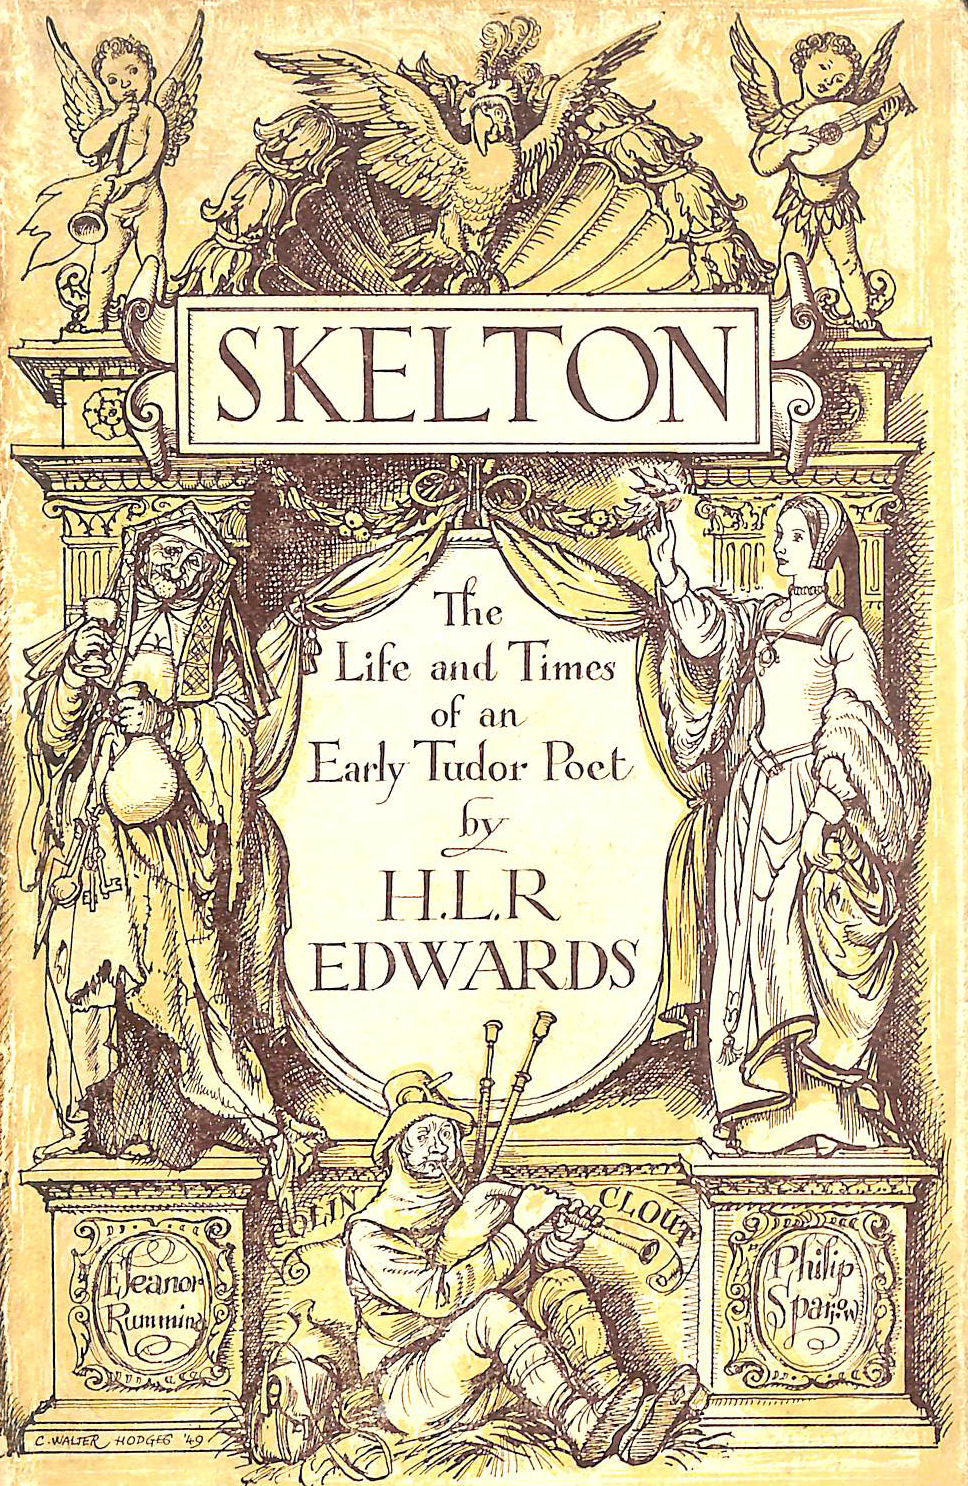 EDWARDS, H. L. R. - SKELTON: THE LIFE AND TIMES OF AN EARLY TUDOR POET.